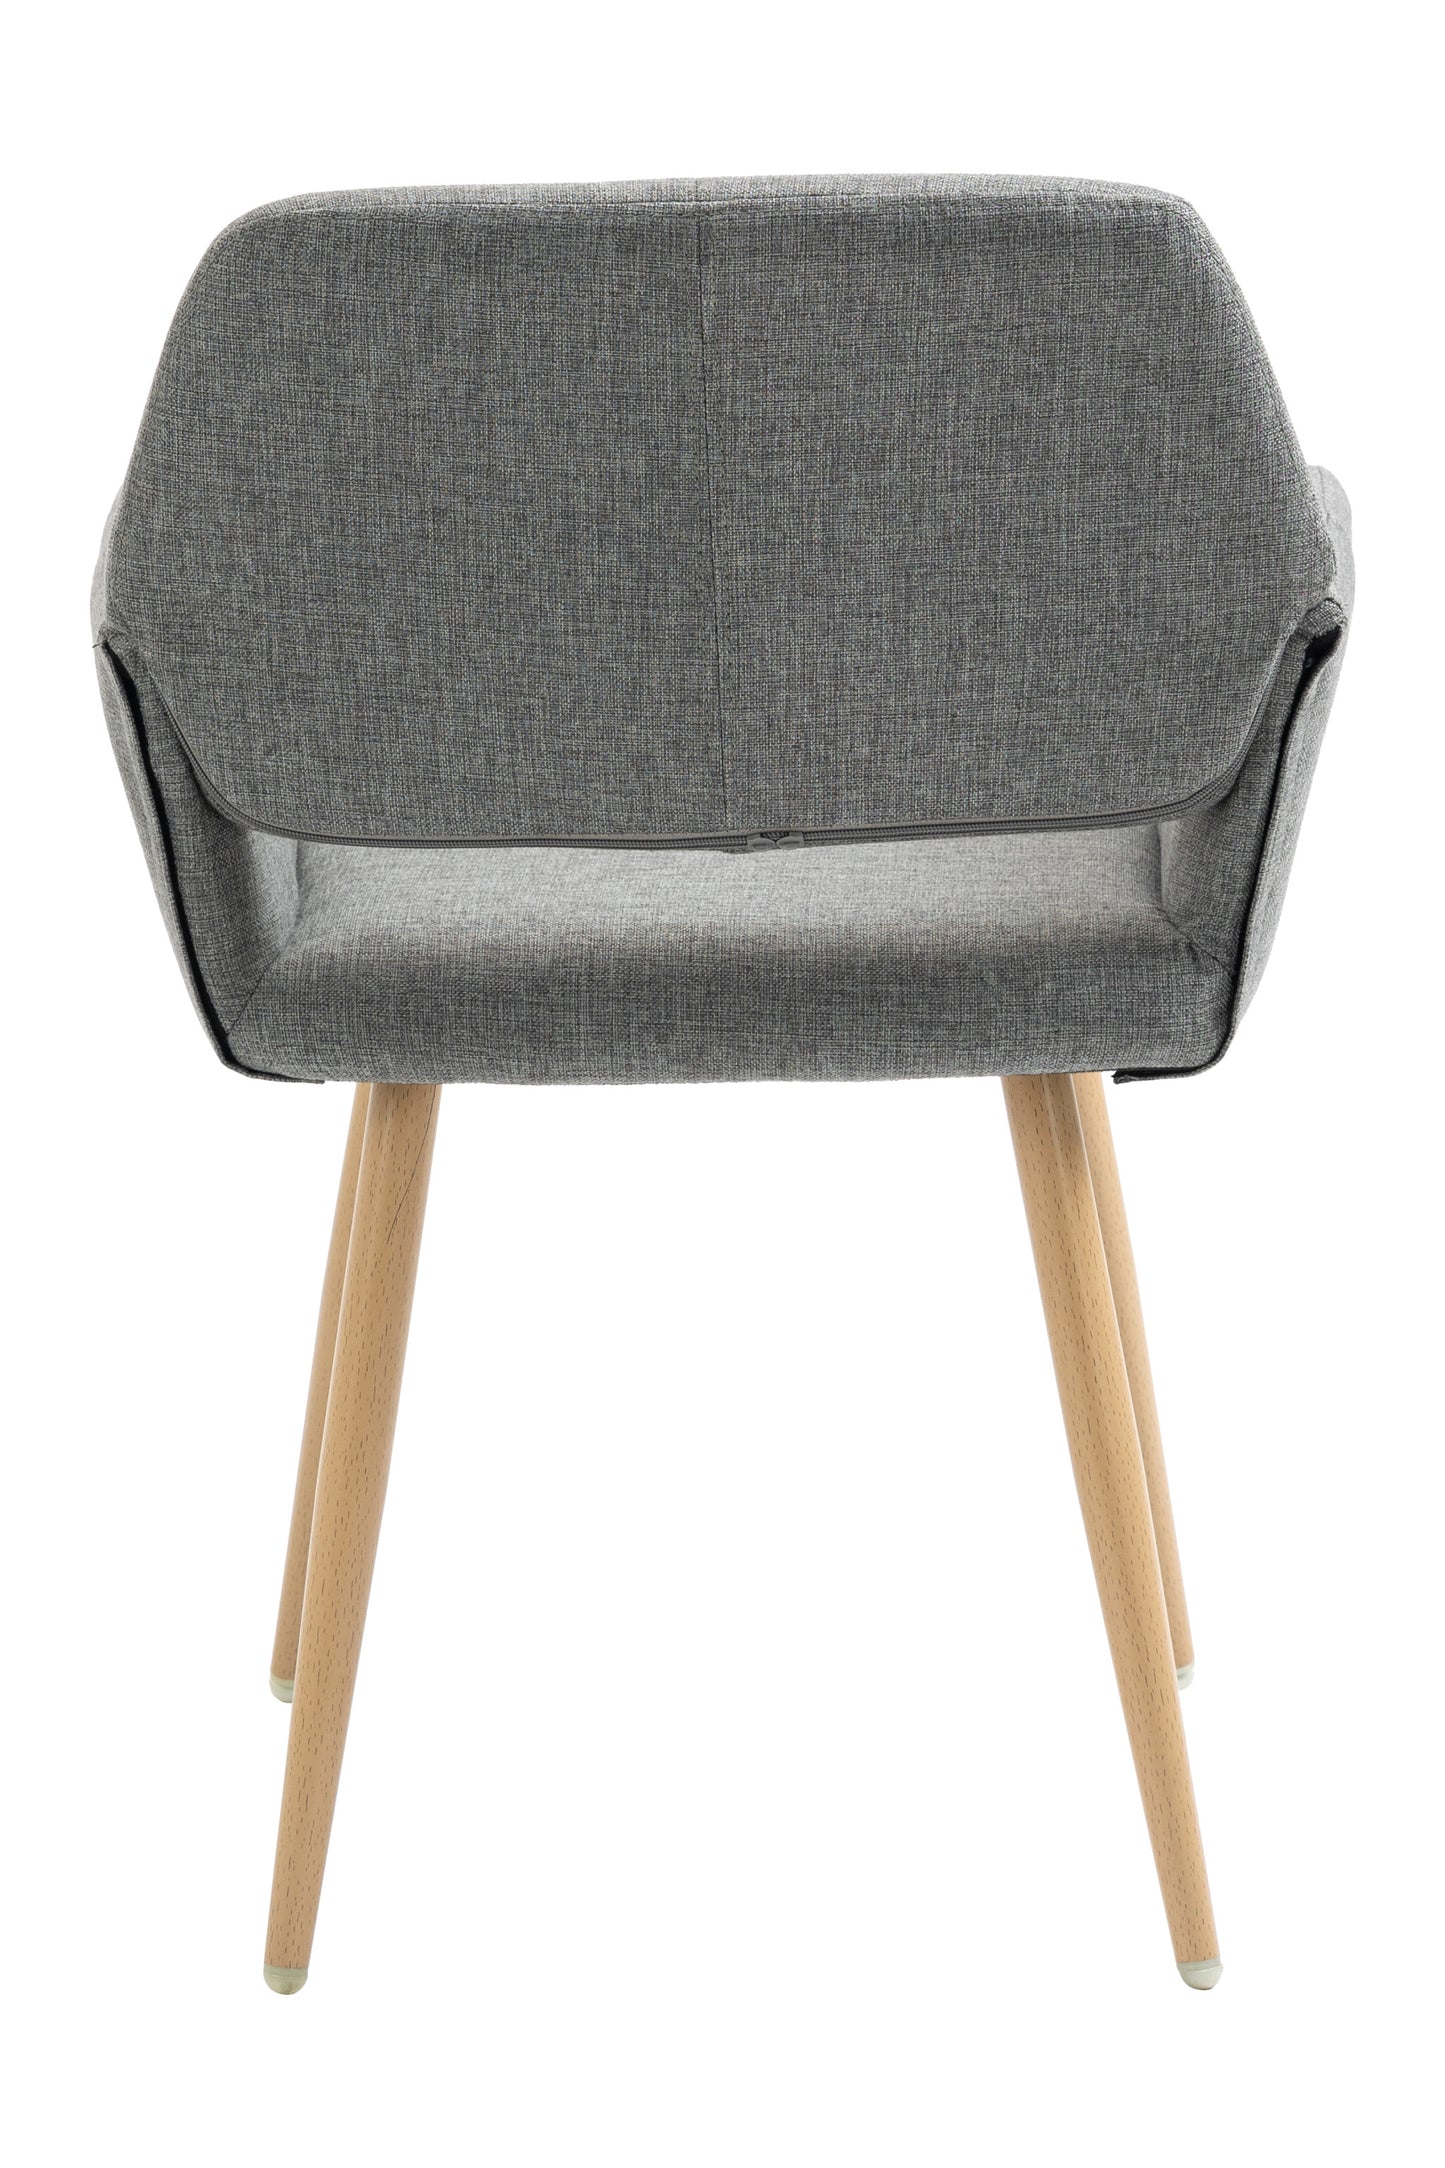 Gray Upholstered Dining Chair